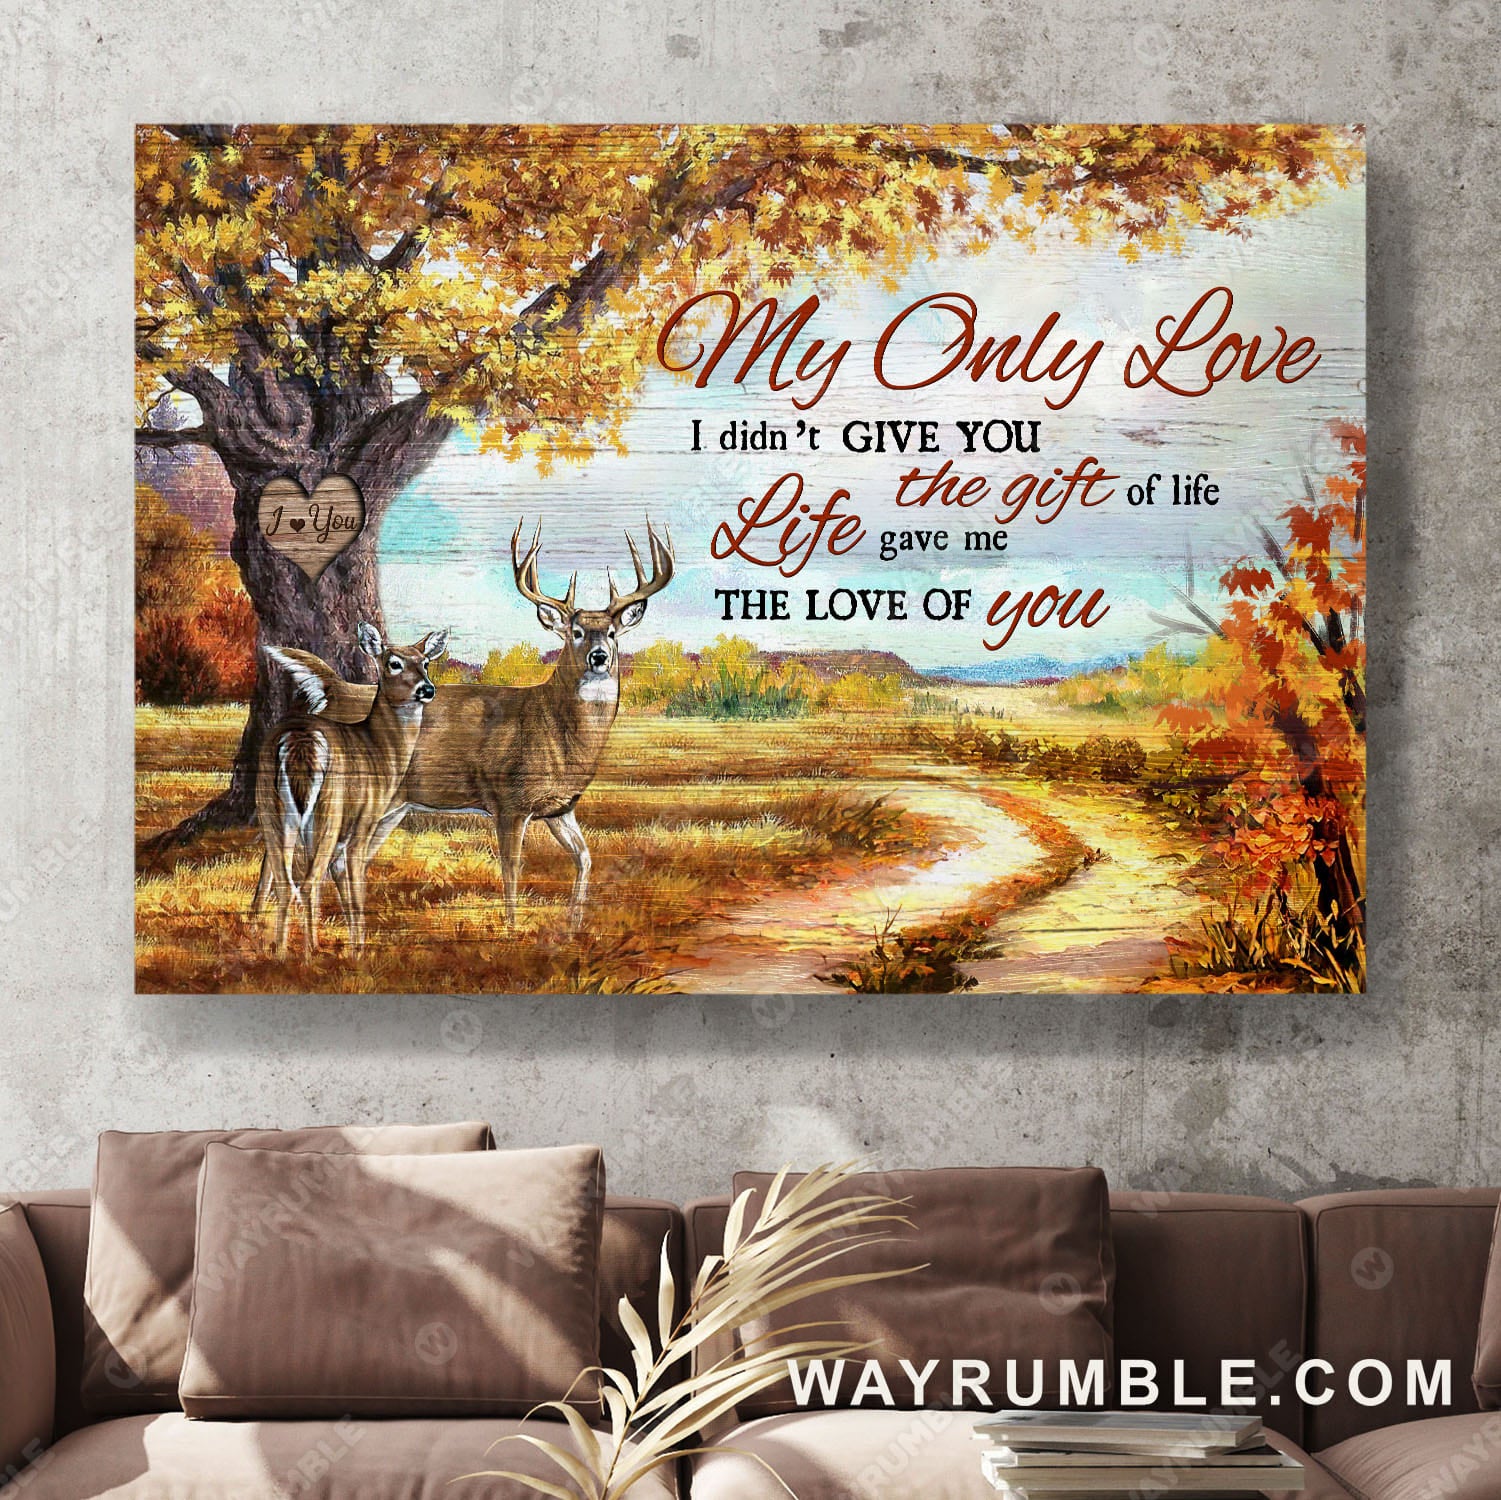 Autumn forest, Deer painting, Life gave me the love of you - Couple Landscape Canvas Prints, Wall Art